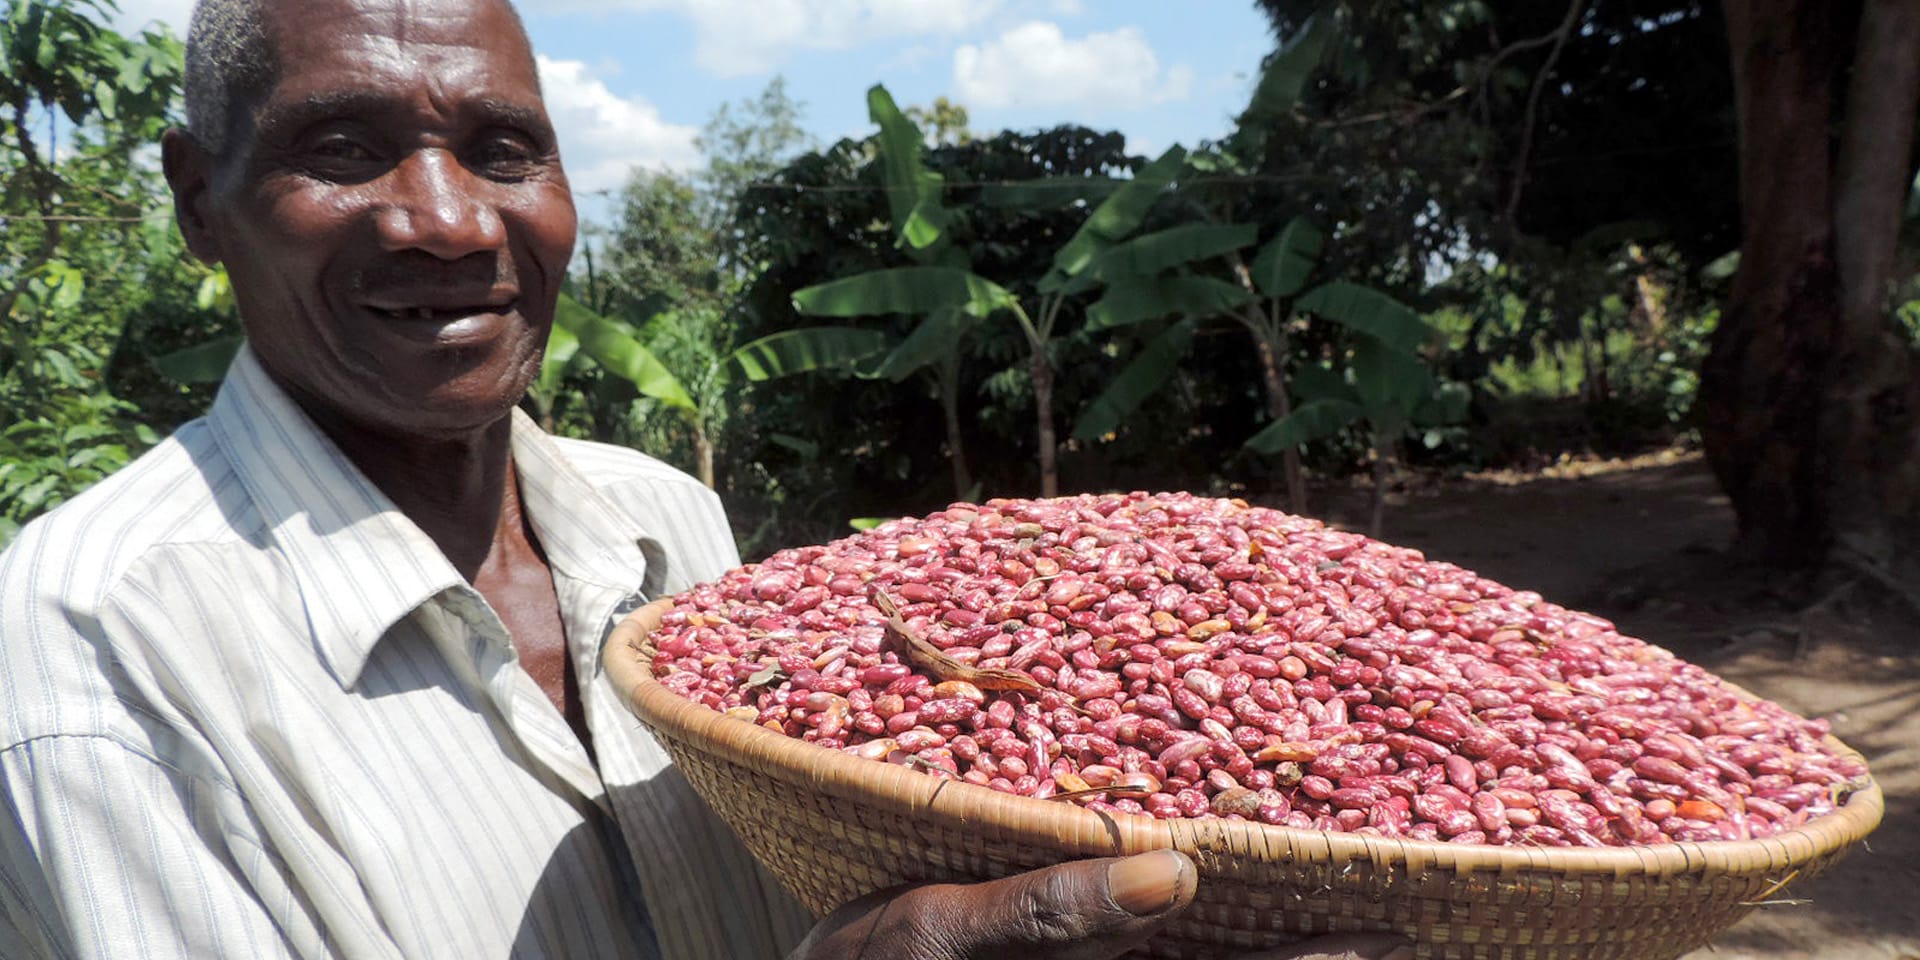 Image of a man smiling and holding a large woven basket filled with red-colored beans.